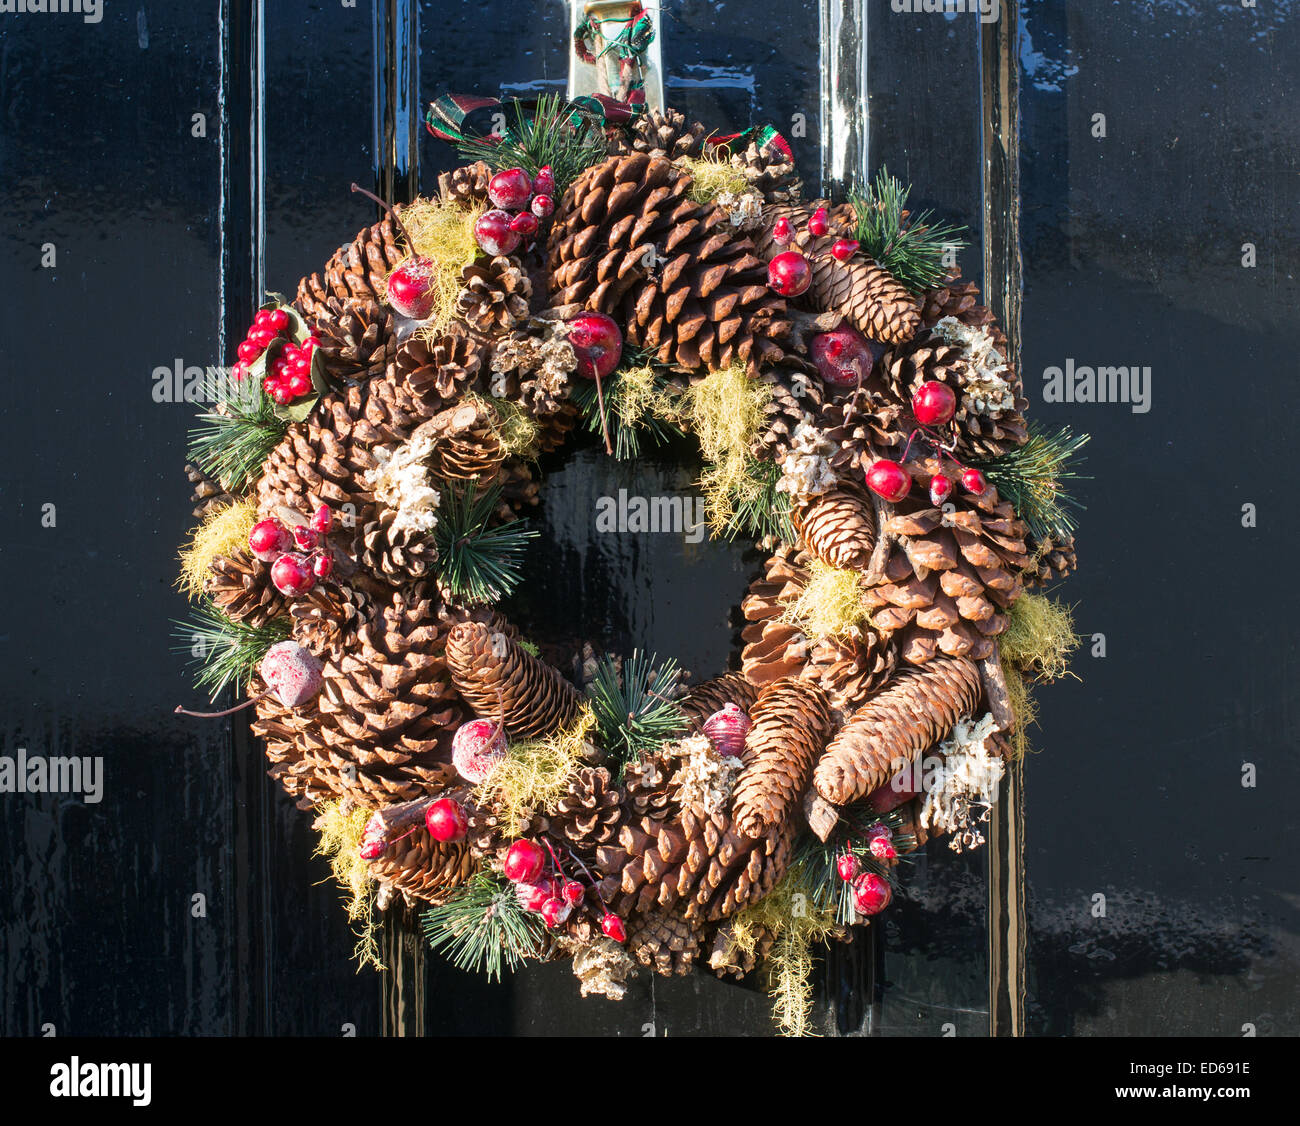 Christmas wreath of fir cones and berries on a house door Durham City north east England, UK Stock Photo